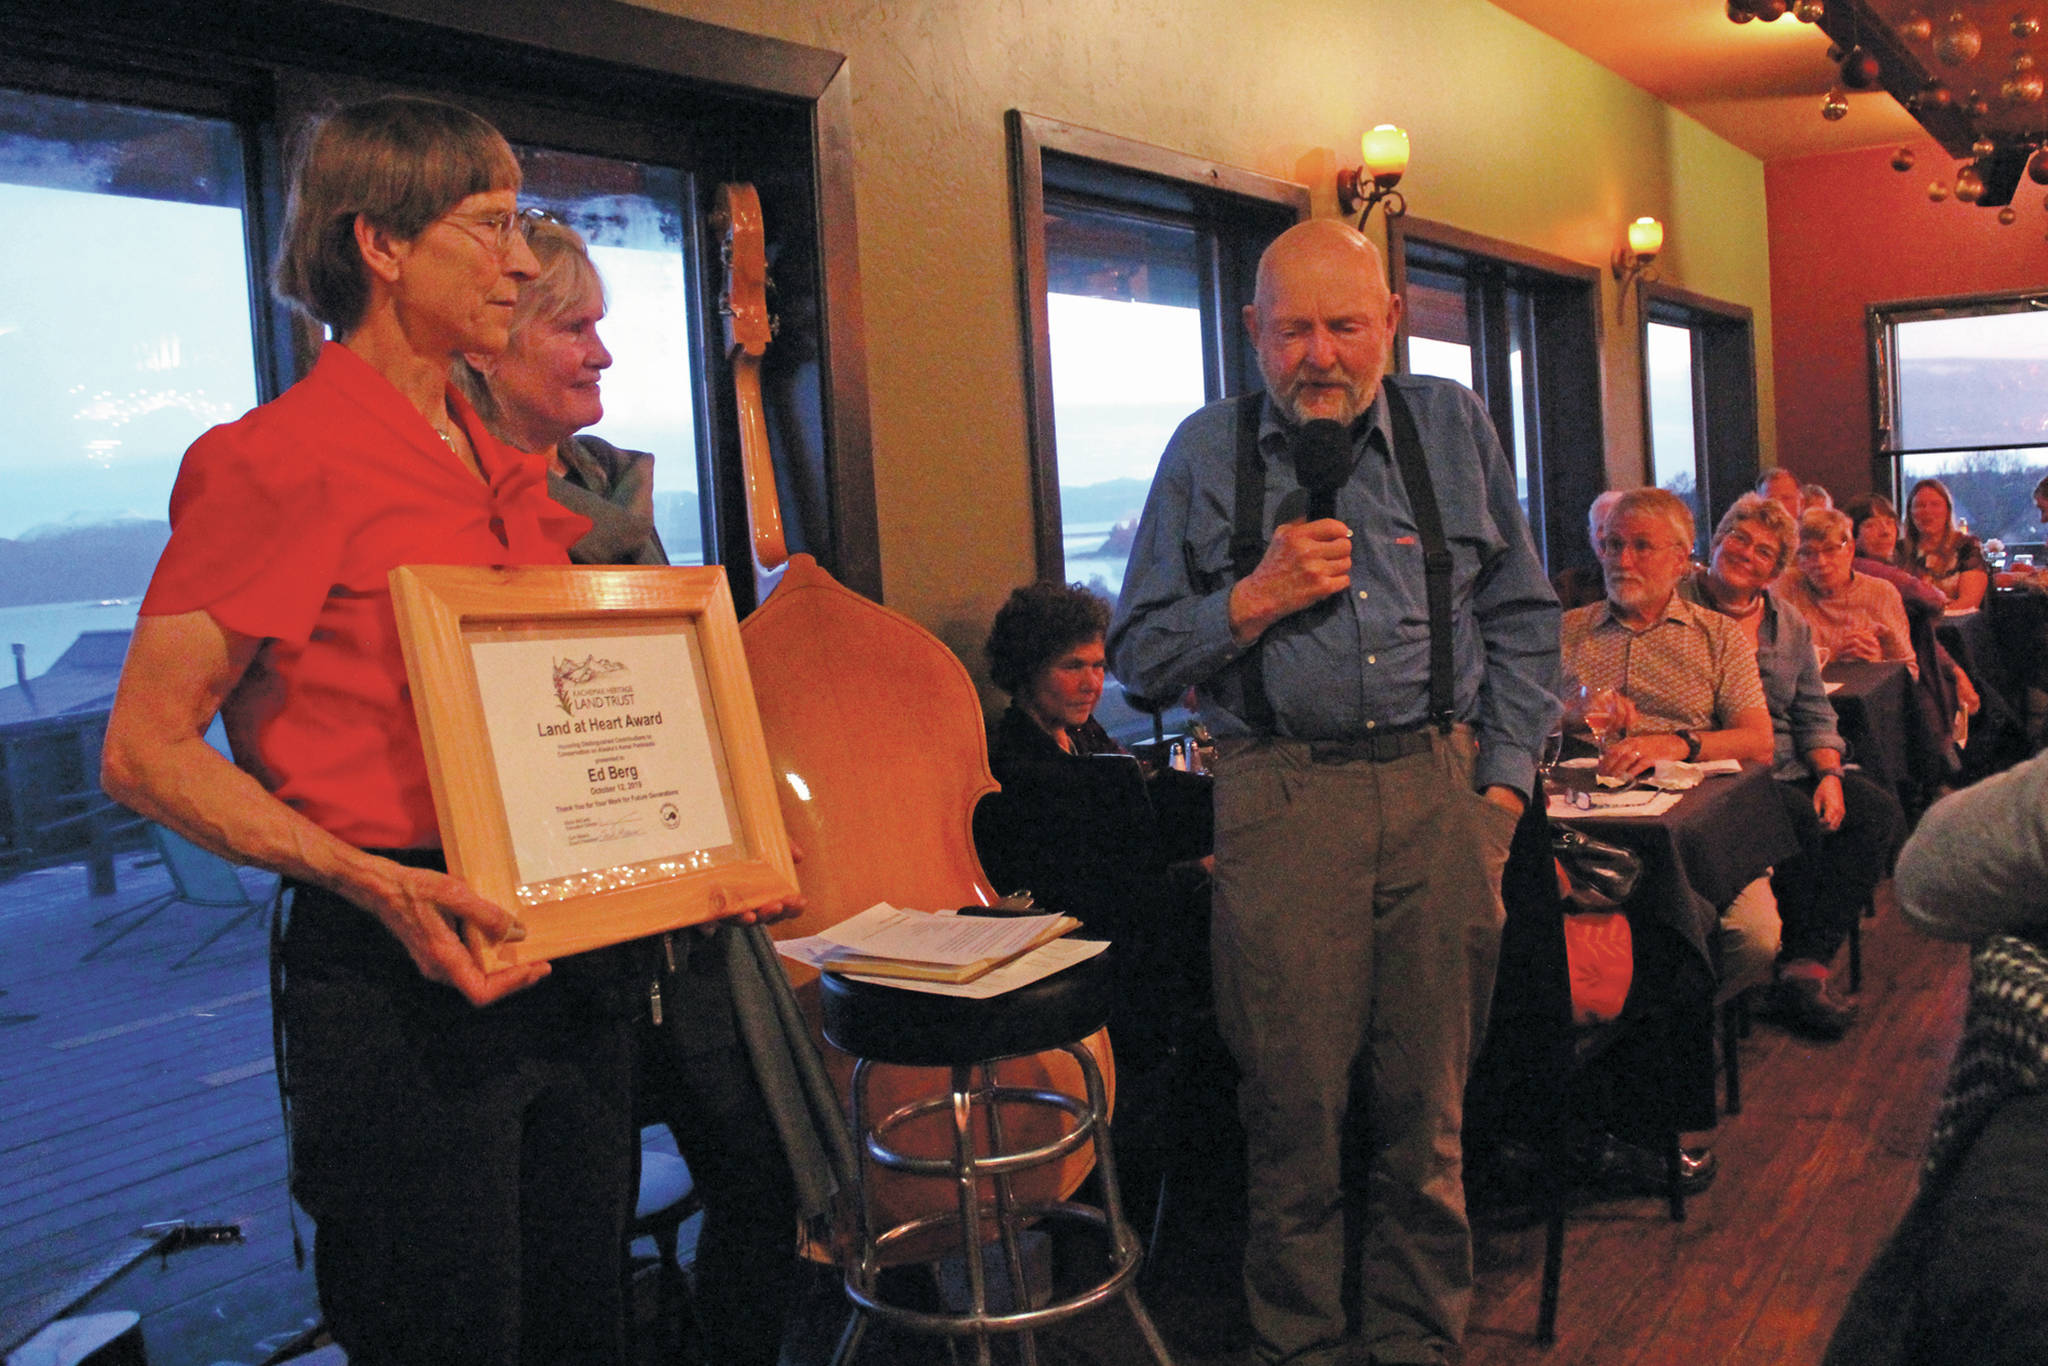 Ed Berg, right, accepts the Land at Heart Award from Nina Faust (left) and Marie McCarty (center) during the annual gala fundraiser event for the Kachemak Heritage Land Trust on Saturday, Oct. 12, 2019 at Wasabi’s Bistro in Homer, Alaska. (Photo by Megan Pacer/Homer News)